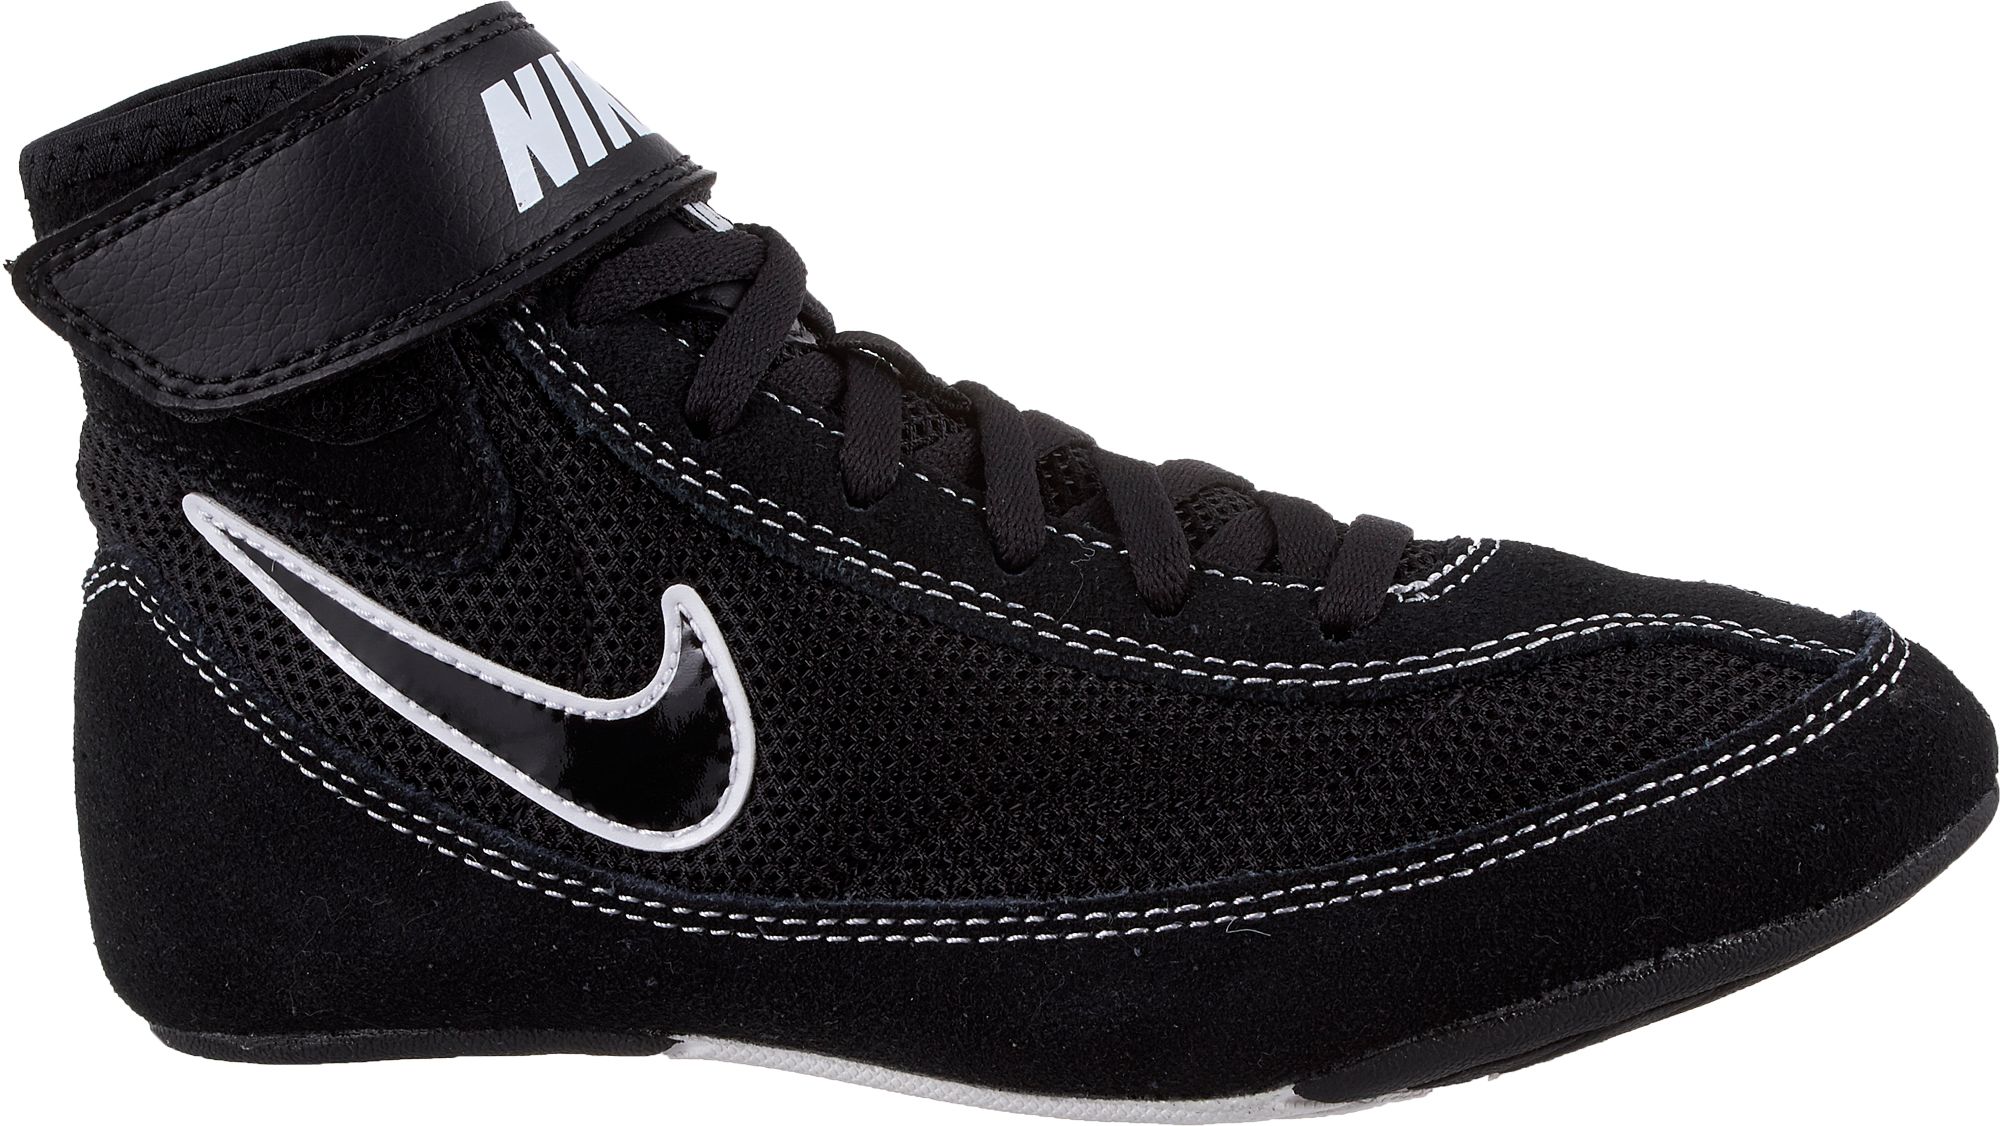 nike speed sweep wrestling shoes